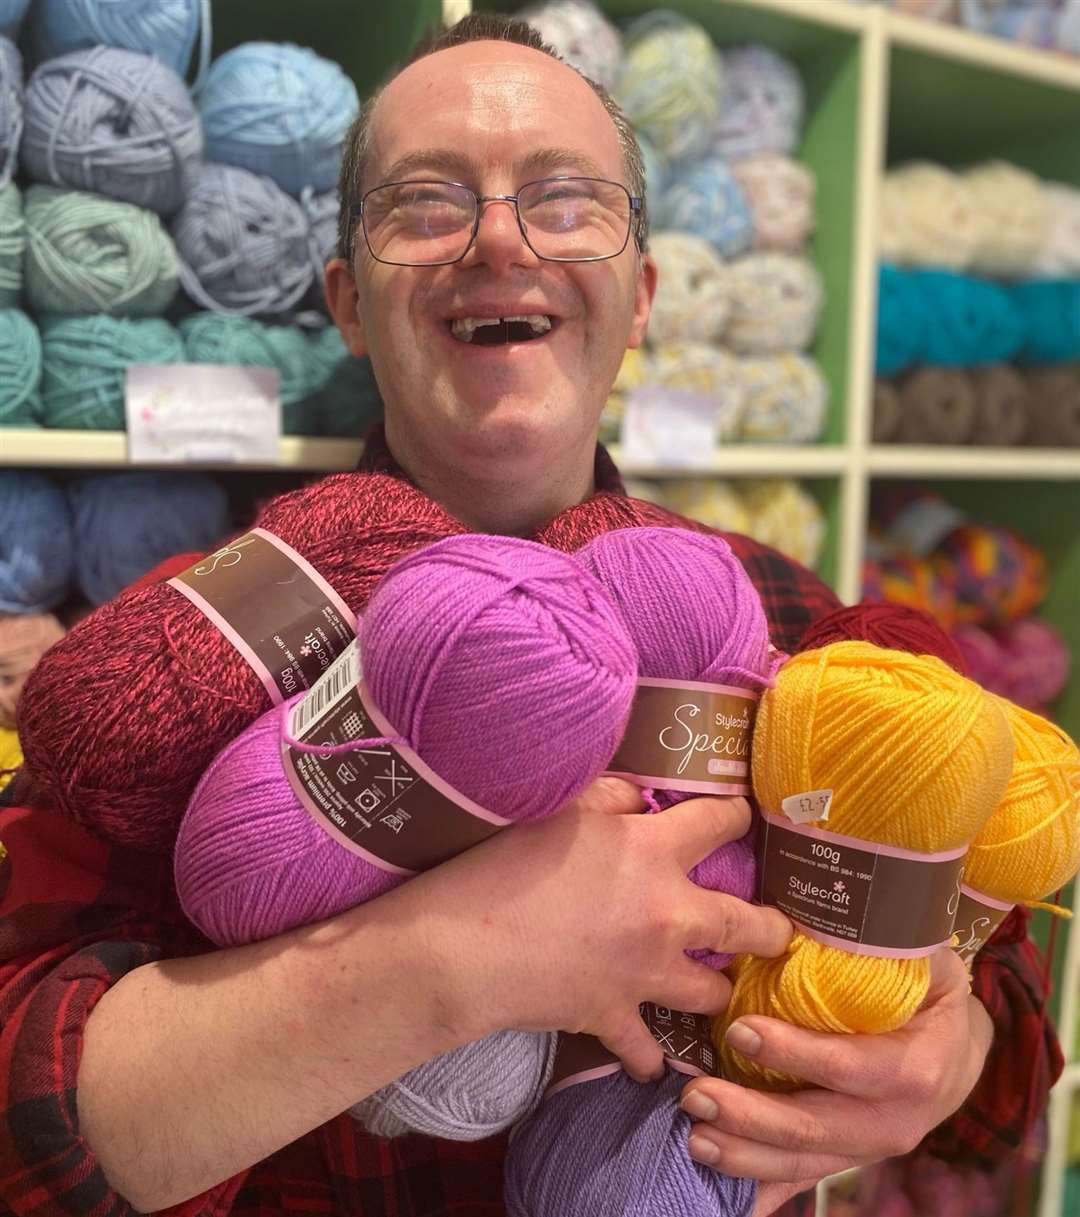 The company offers opportunities for people with learning disabilities. Picture: The Hop, Stitch & Jumper